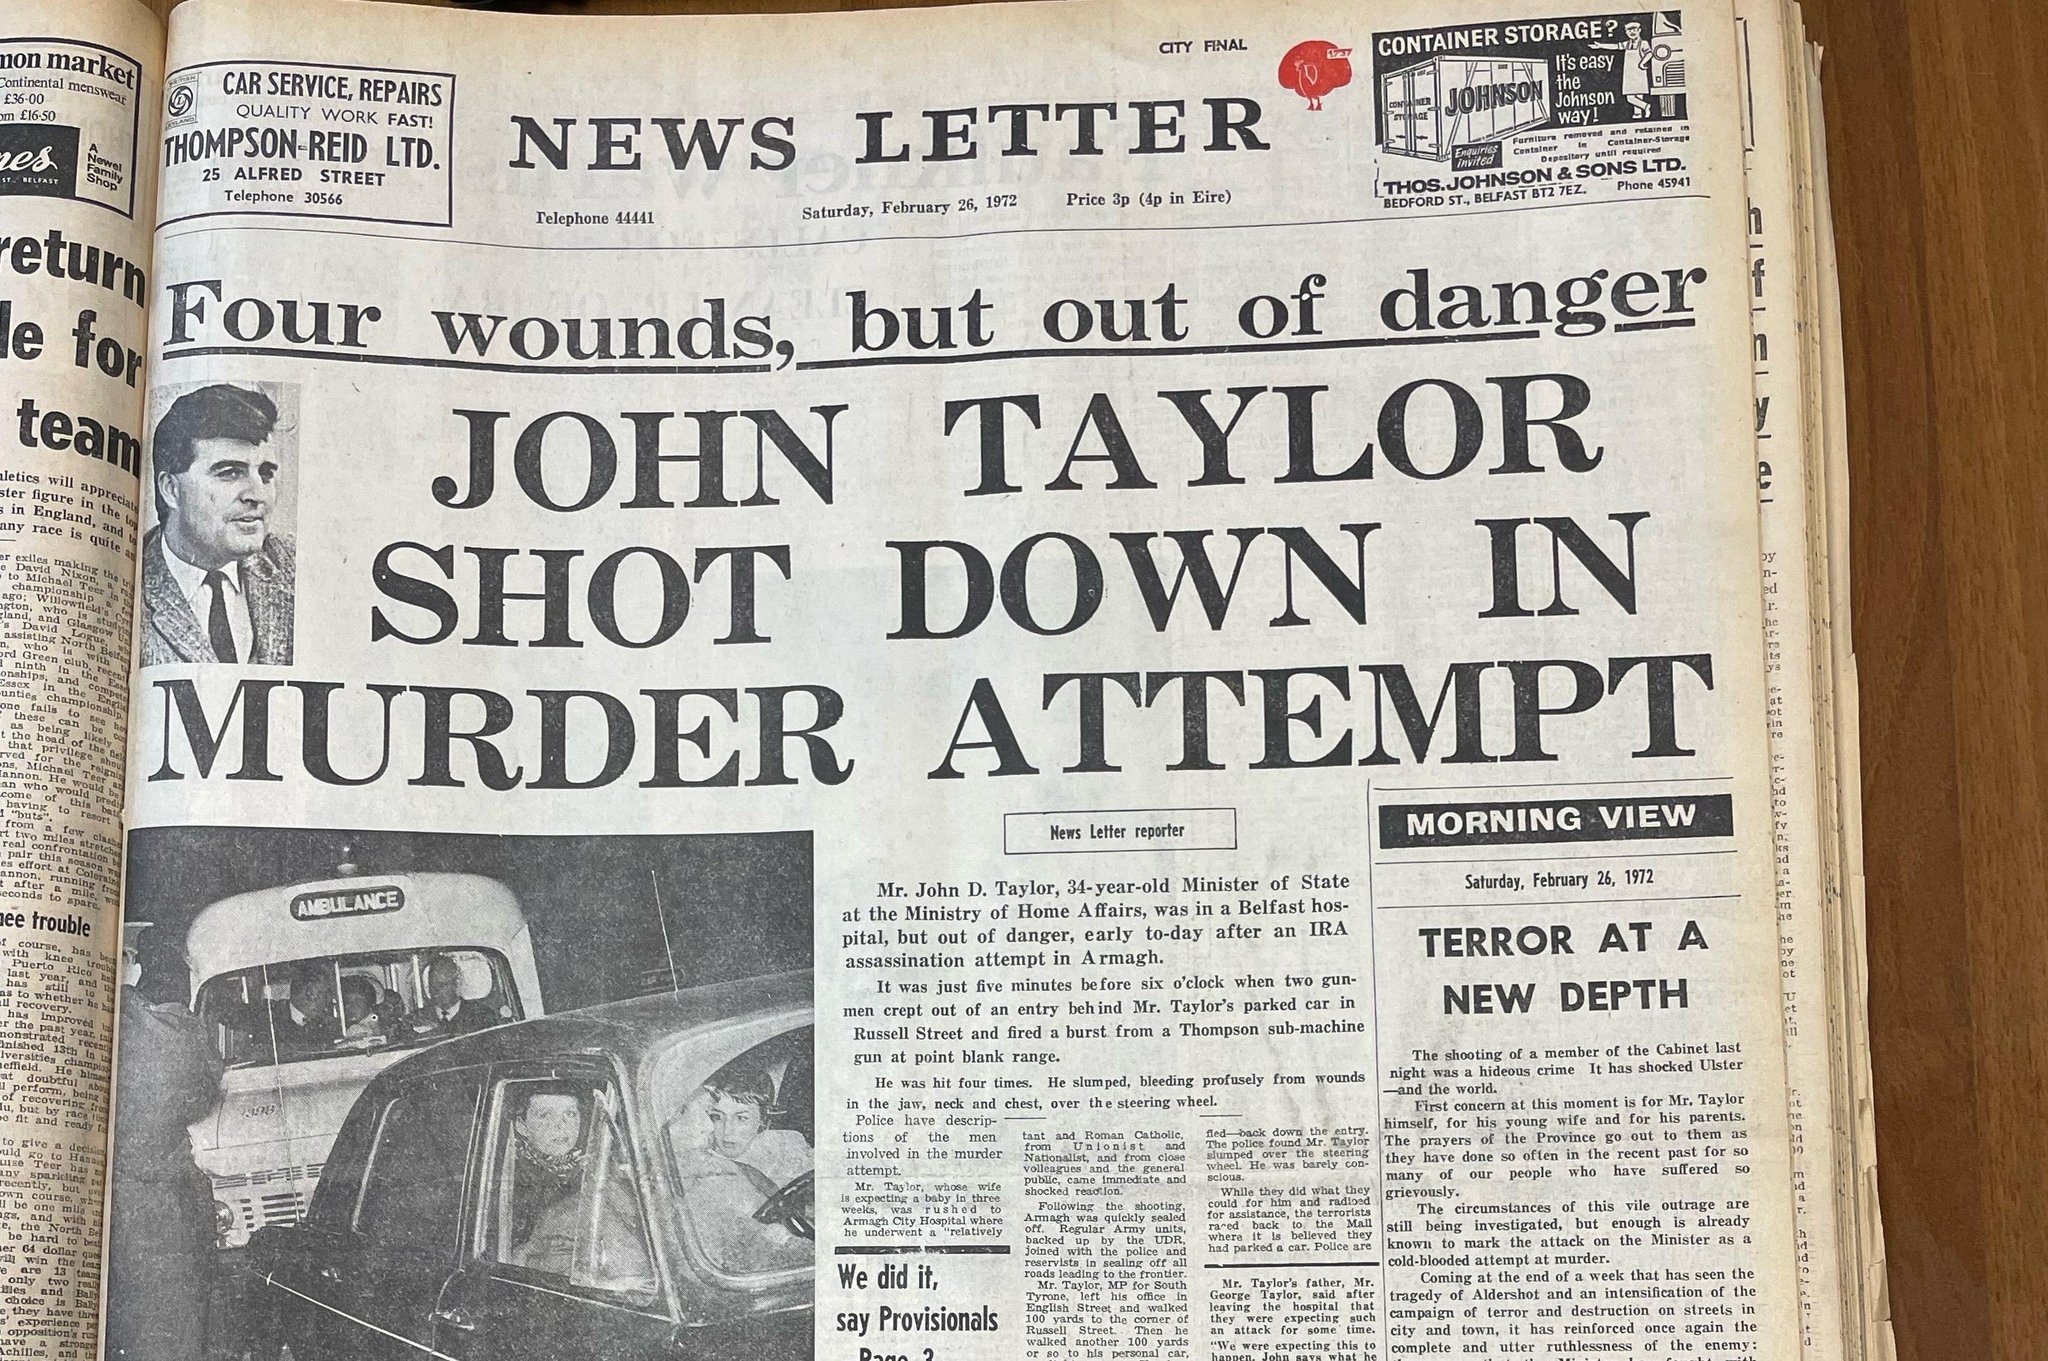 It is fifty years since UUP man John Taylor was shot and injured by the IRA